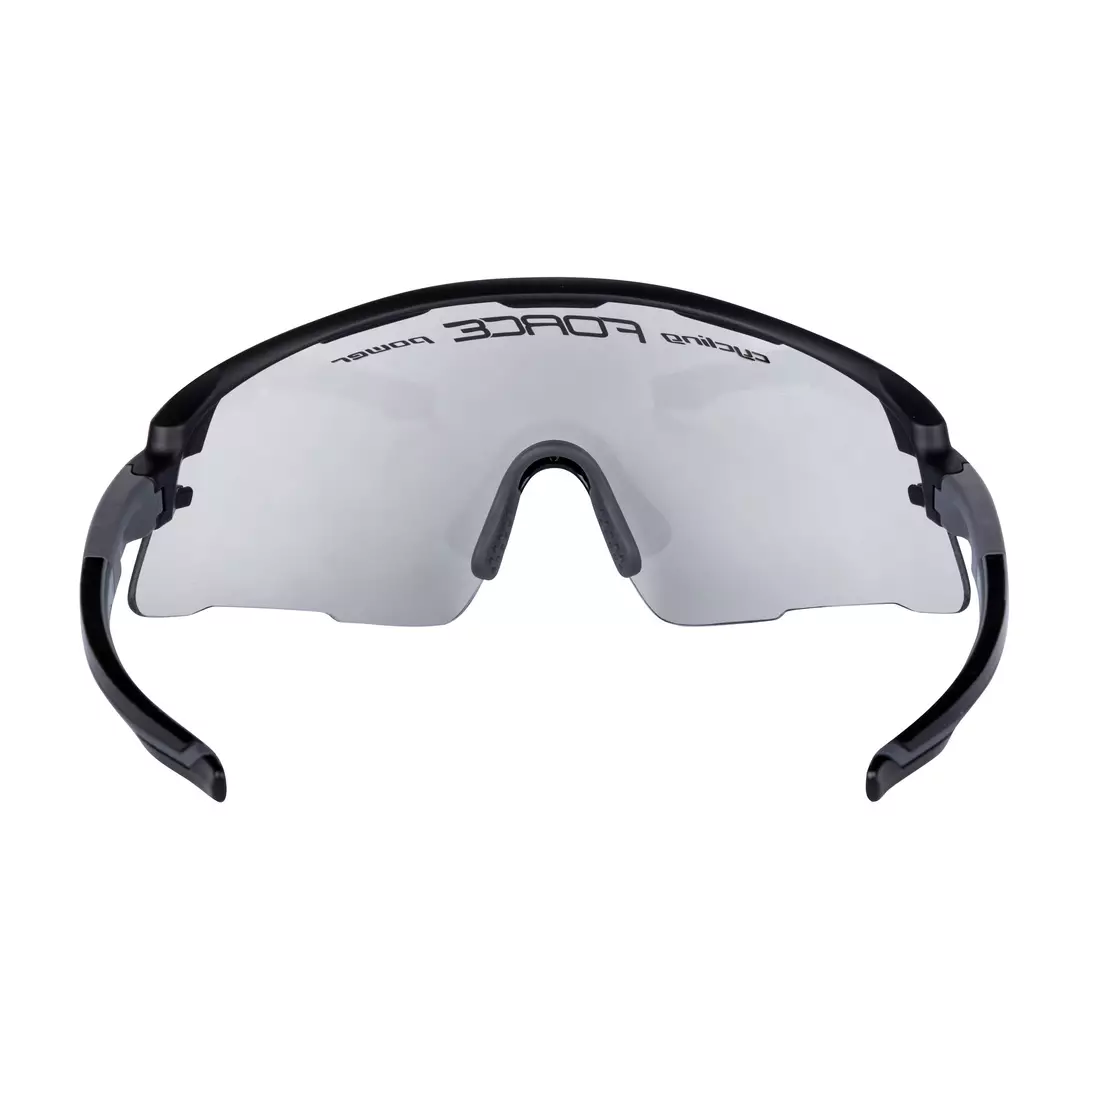 FORCE AMBIENT photochromic sport glasses, black-gray